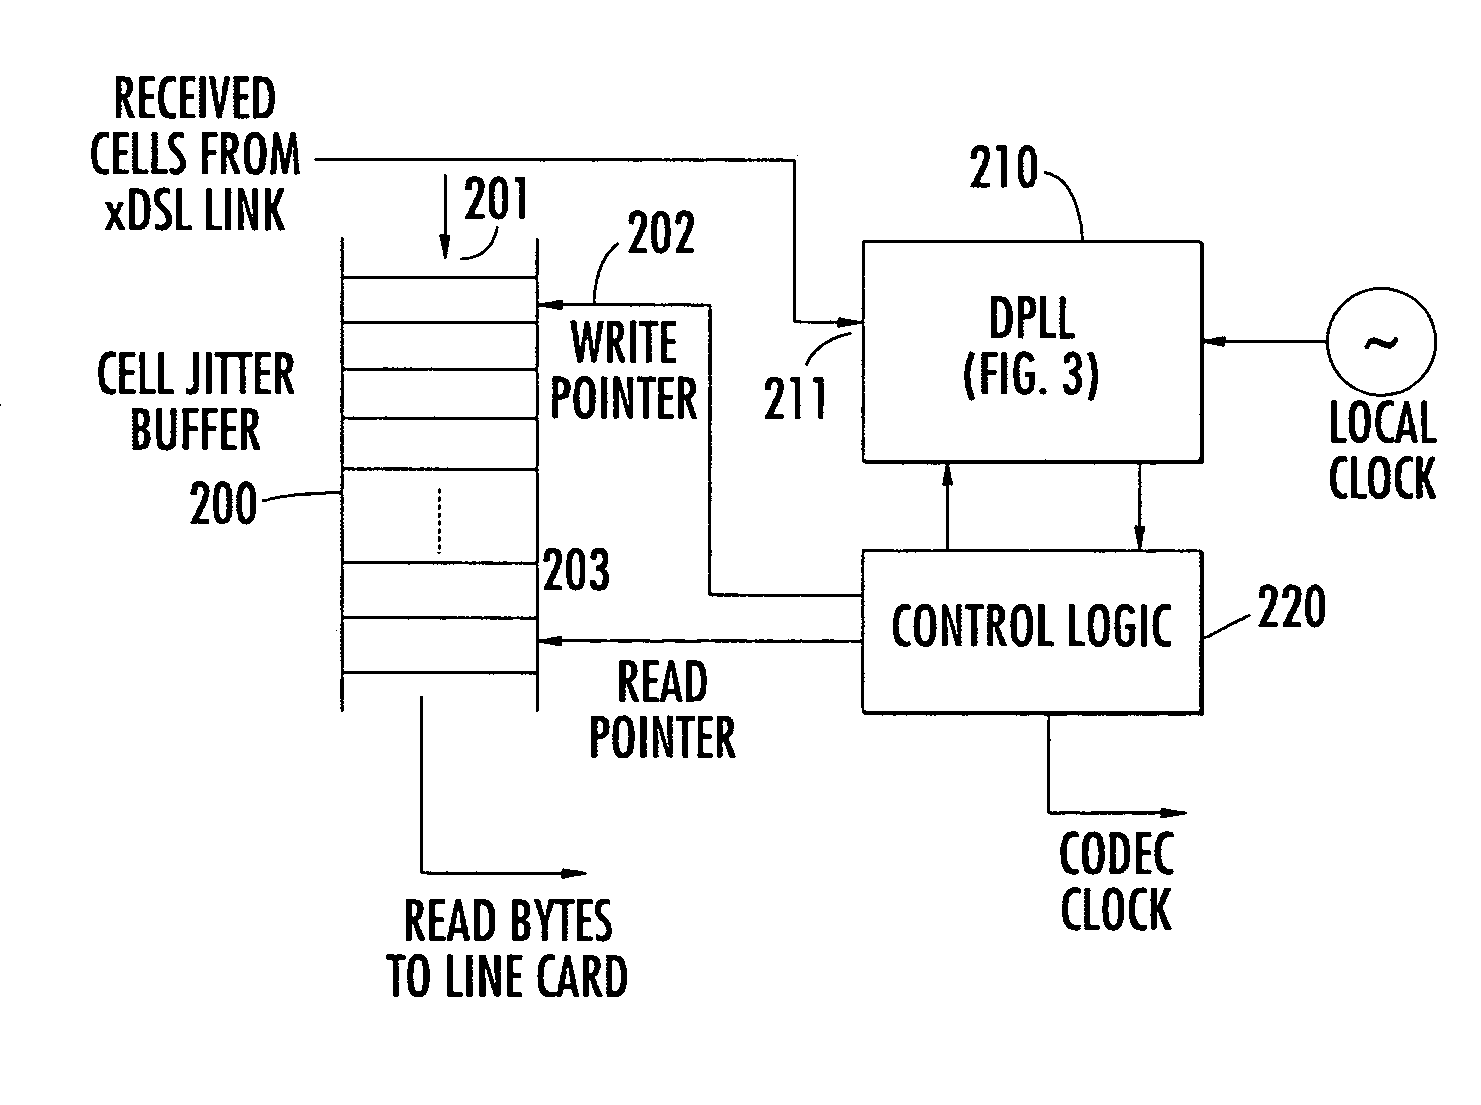 Method and apparatus for providing reliable voice and voice-band data transmission over asynchronous transfer mode (ATM) network